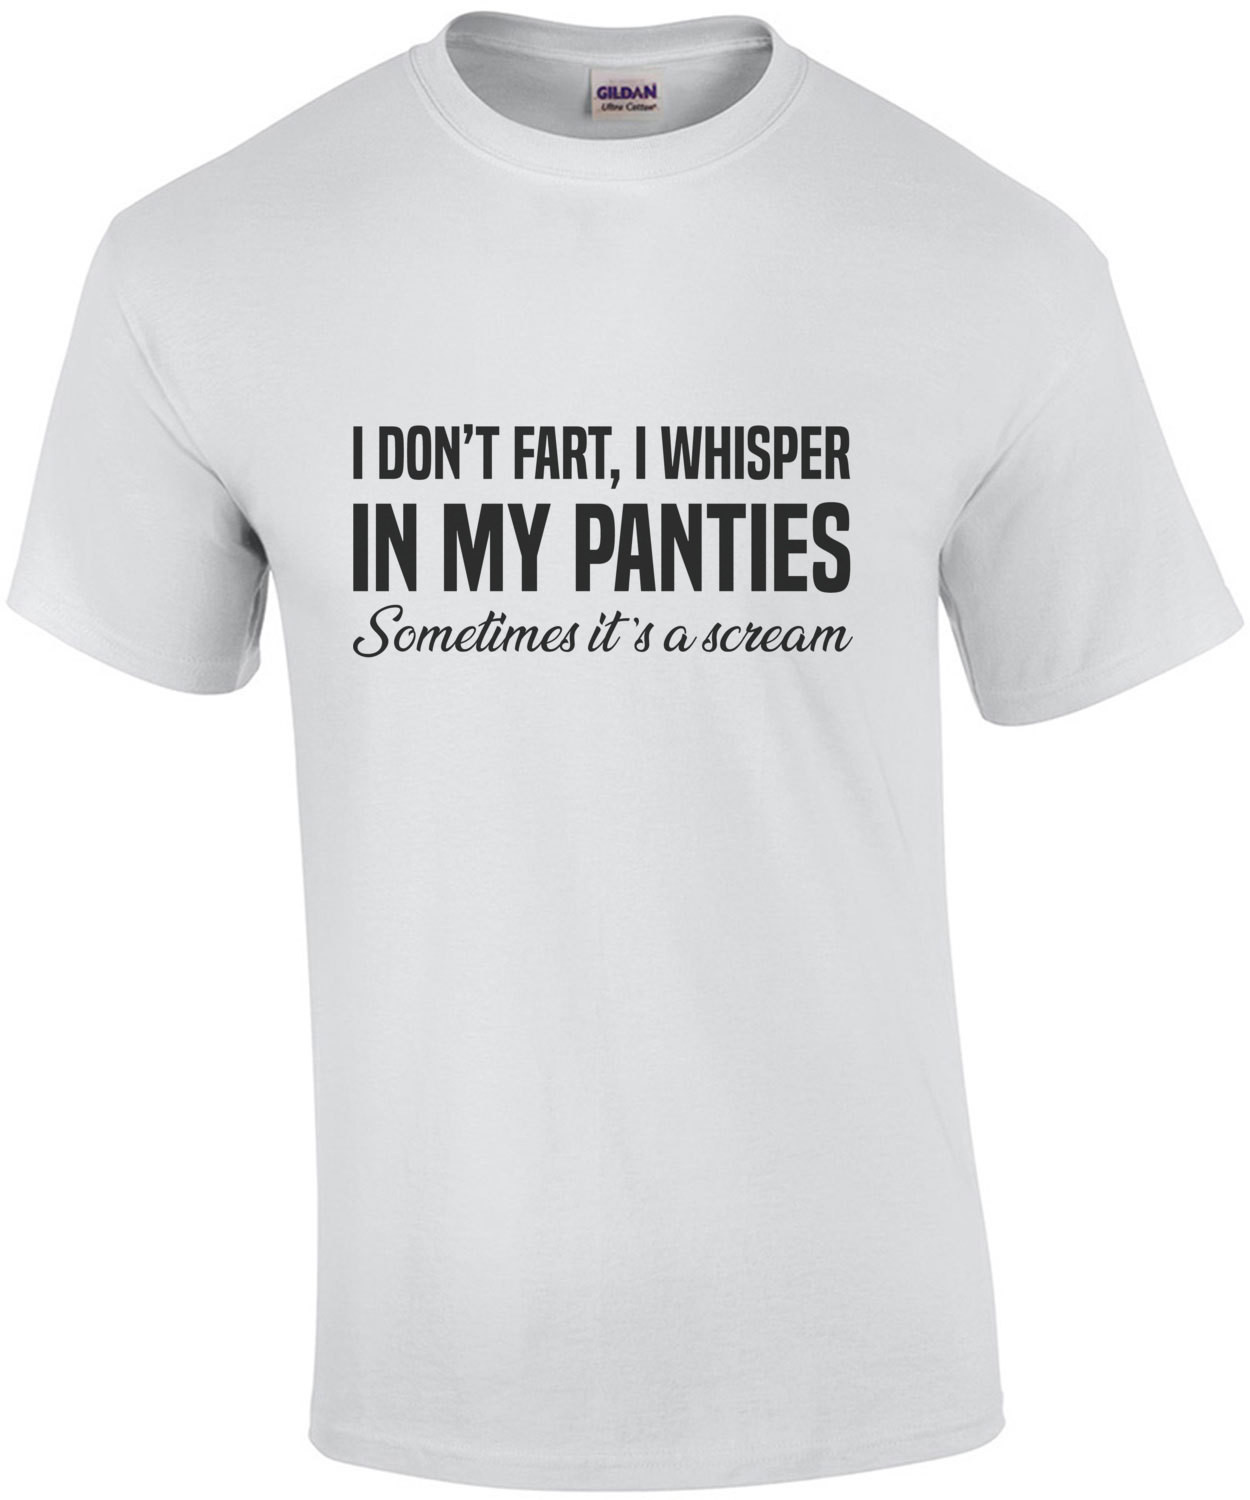 I don't fart, I whisper in my panties - Sometimes it's a scream - funny ladies t-shirt